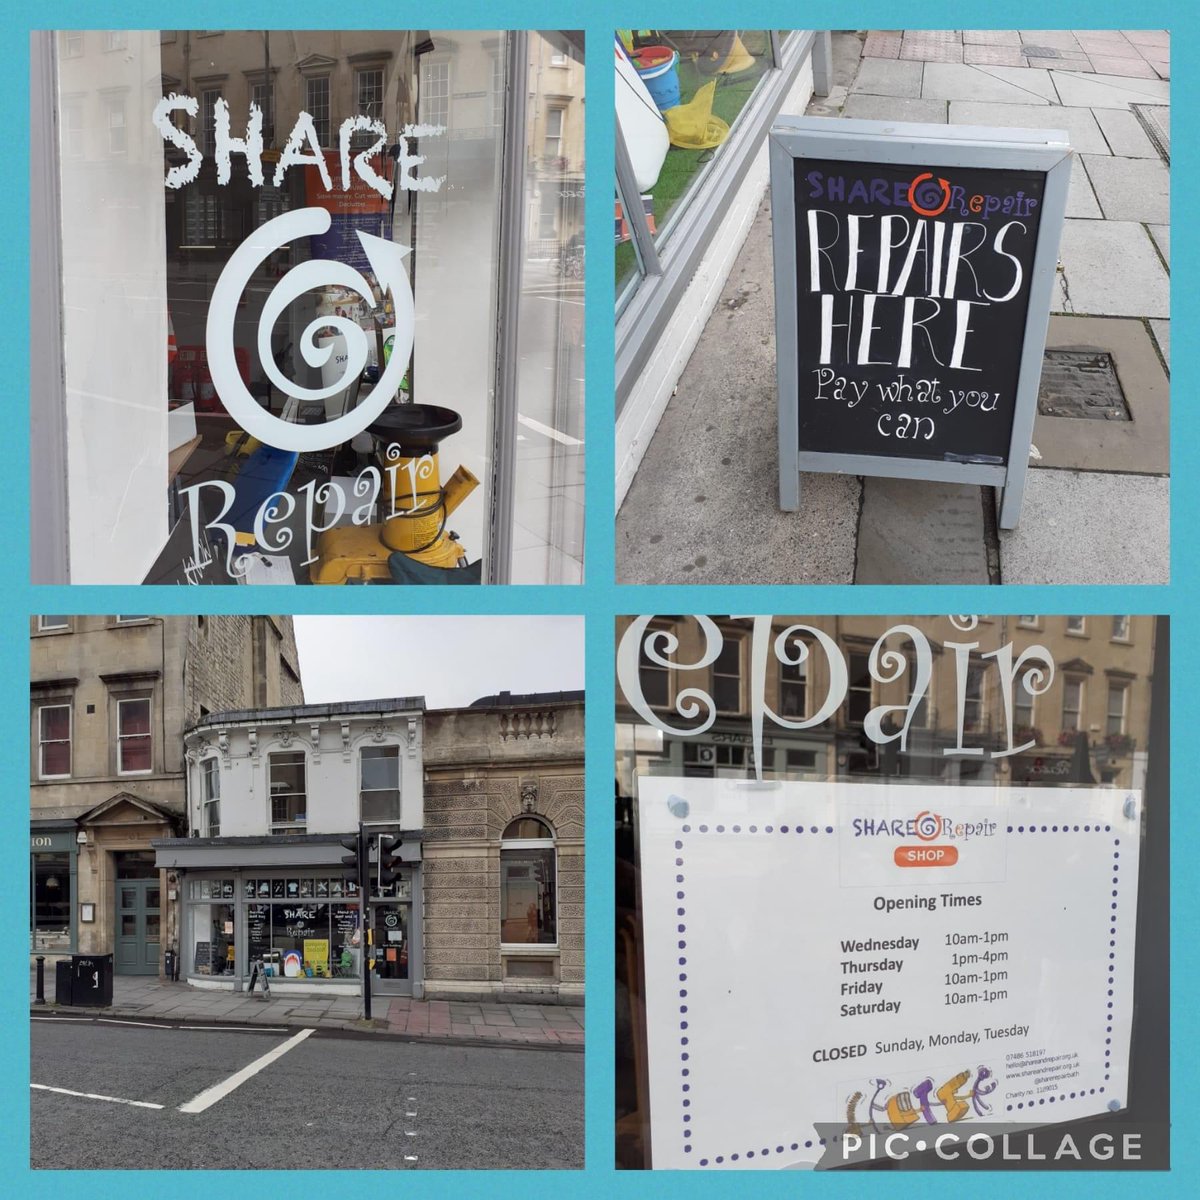 A quick visit to the Share & Repair shop yesterday in George Street Bath
One of our causes suppoted by Co-op Larkhall 
'Mend it, Don't end it'
'Borrow it, Don't buy'
Give them a visit @ShareRepairBath 
Shareandrepair.org.uk
Bathlibraryofthings.org.uk